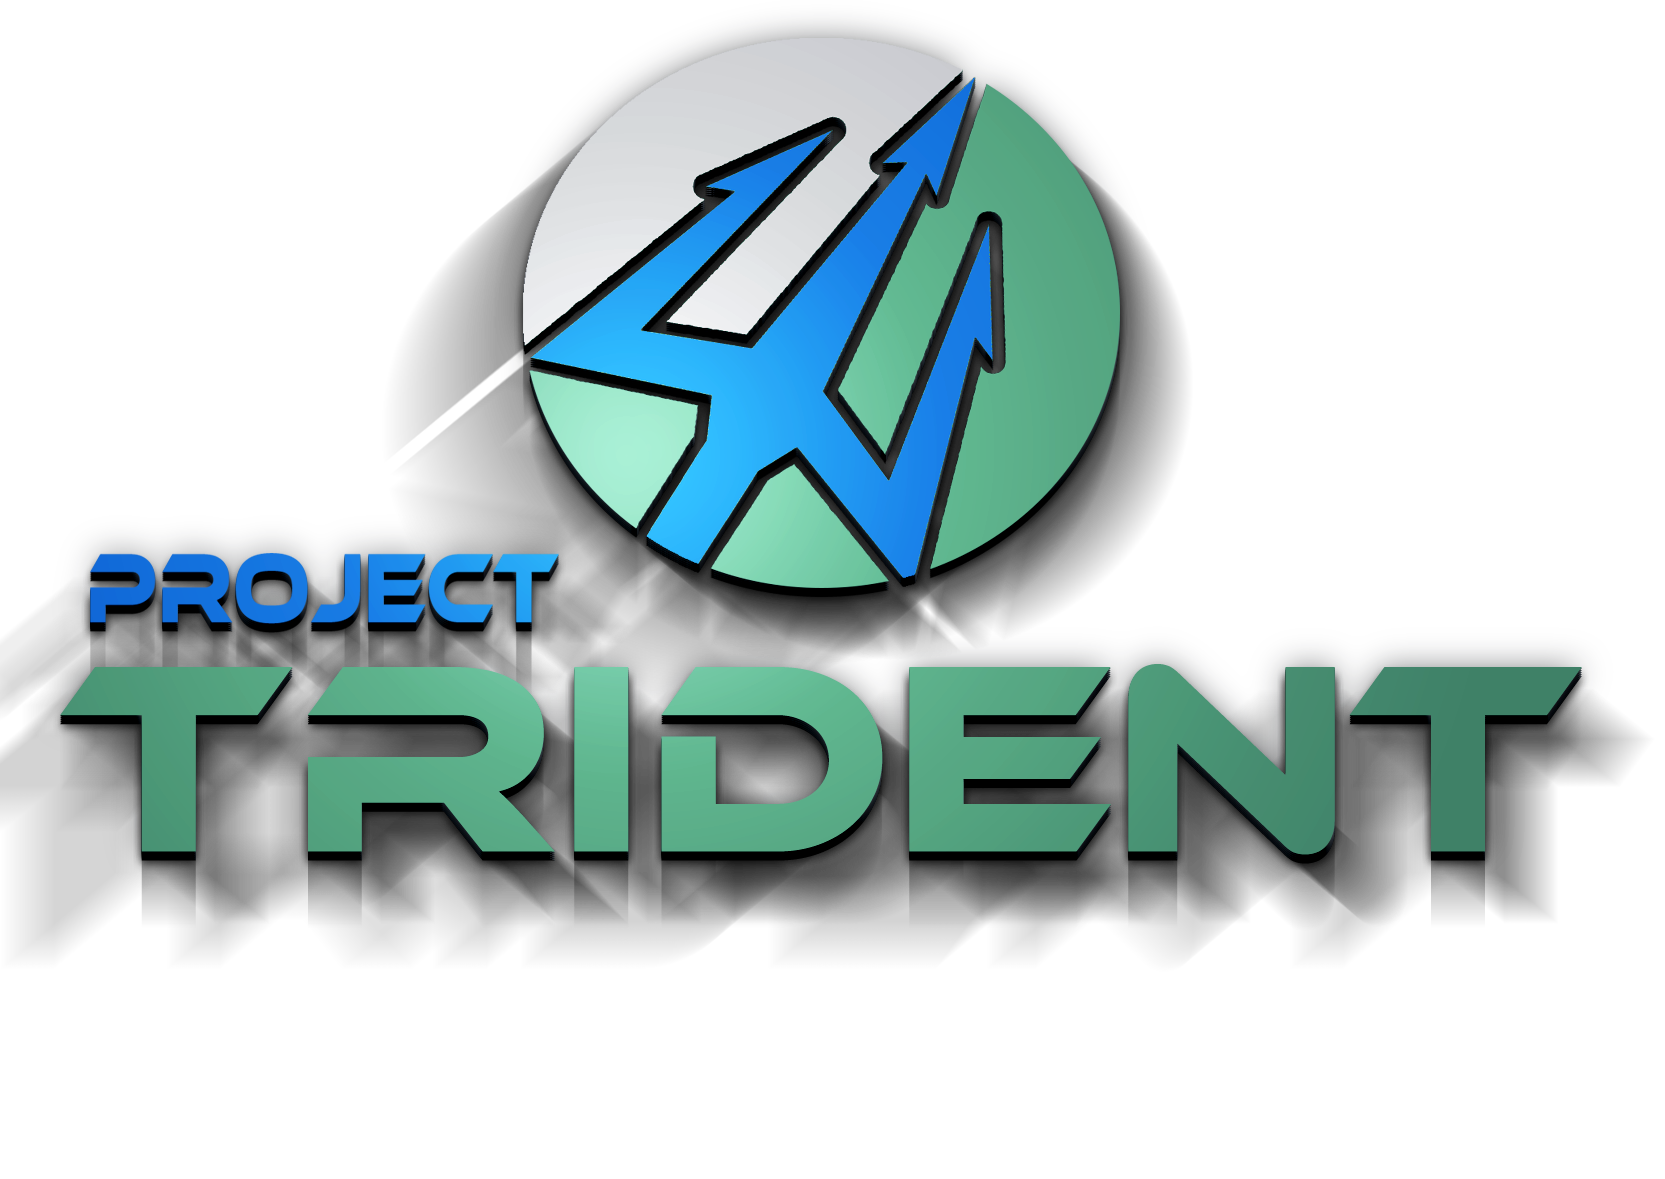 Project Trident